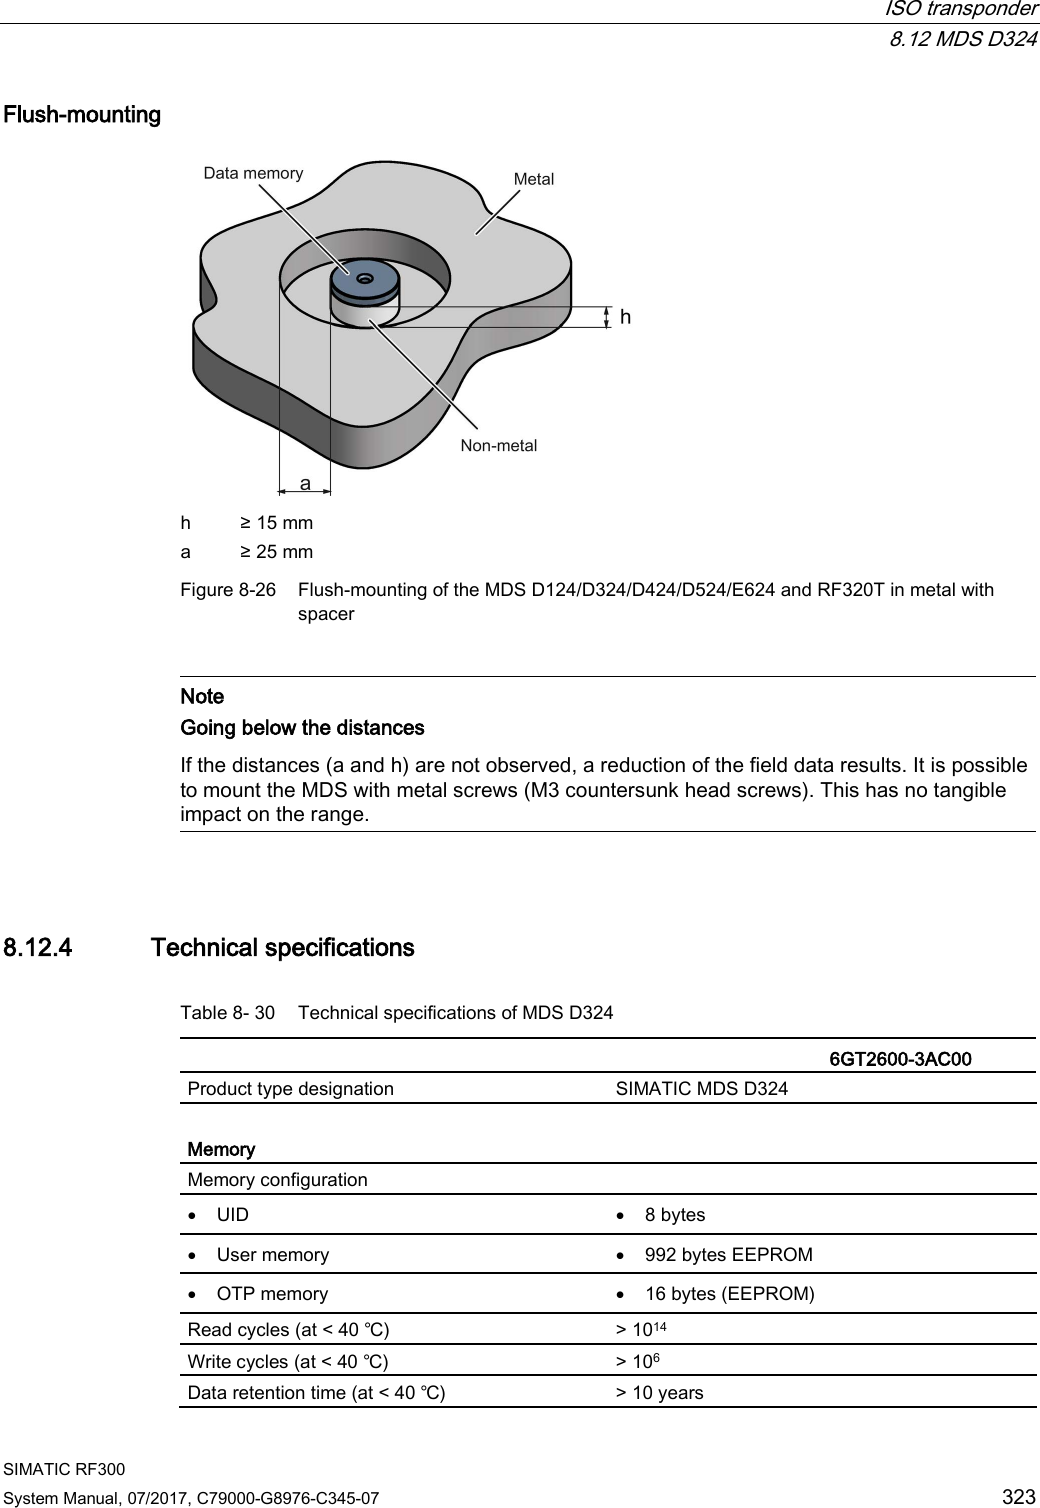  ISO transponder  8.12 MDS D324 SIMATIC RF300 System Manual, 07/2017, C79000-G8976-C345-07 323 Flush-mounting  h ≥ 15 mm a ≥ 25 mm Figure 8-26 Flush-mounting of the MDS D124/D324/D424/D524/E624 and RF320T in metal with spacer   Note Going below the distances  If the distances (a and h) are not observed, a reduction of the field data results. It is possible to mount the MDS with metal screws (M3 countersunk head screws). This has no tangible impact on the range.  8.12.4 Technical specifications Table 8- 30 Technical specifications of MDS D324    6GT2600-3AC00 Product type designation SIMATIC MDS D324  Memory Memory configuration  • UID • 8 bytes • User memory • 992 bytes EEPROM • OTP memory • 16 bytes (EEPROM) Read cycles (at &lt; 40 ℃) &gt; 1014 Write cycles (at &lt; 40 ℃) &gt; 106 Data retention time (at &lt; 40 ℃) &gt; 10 years 